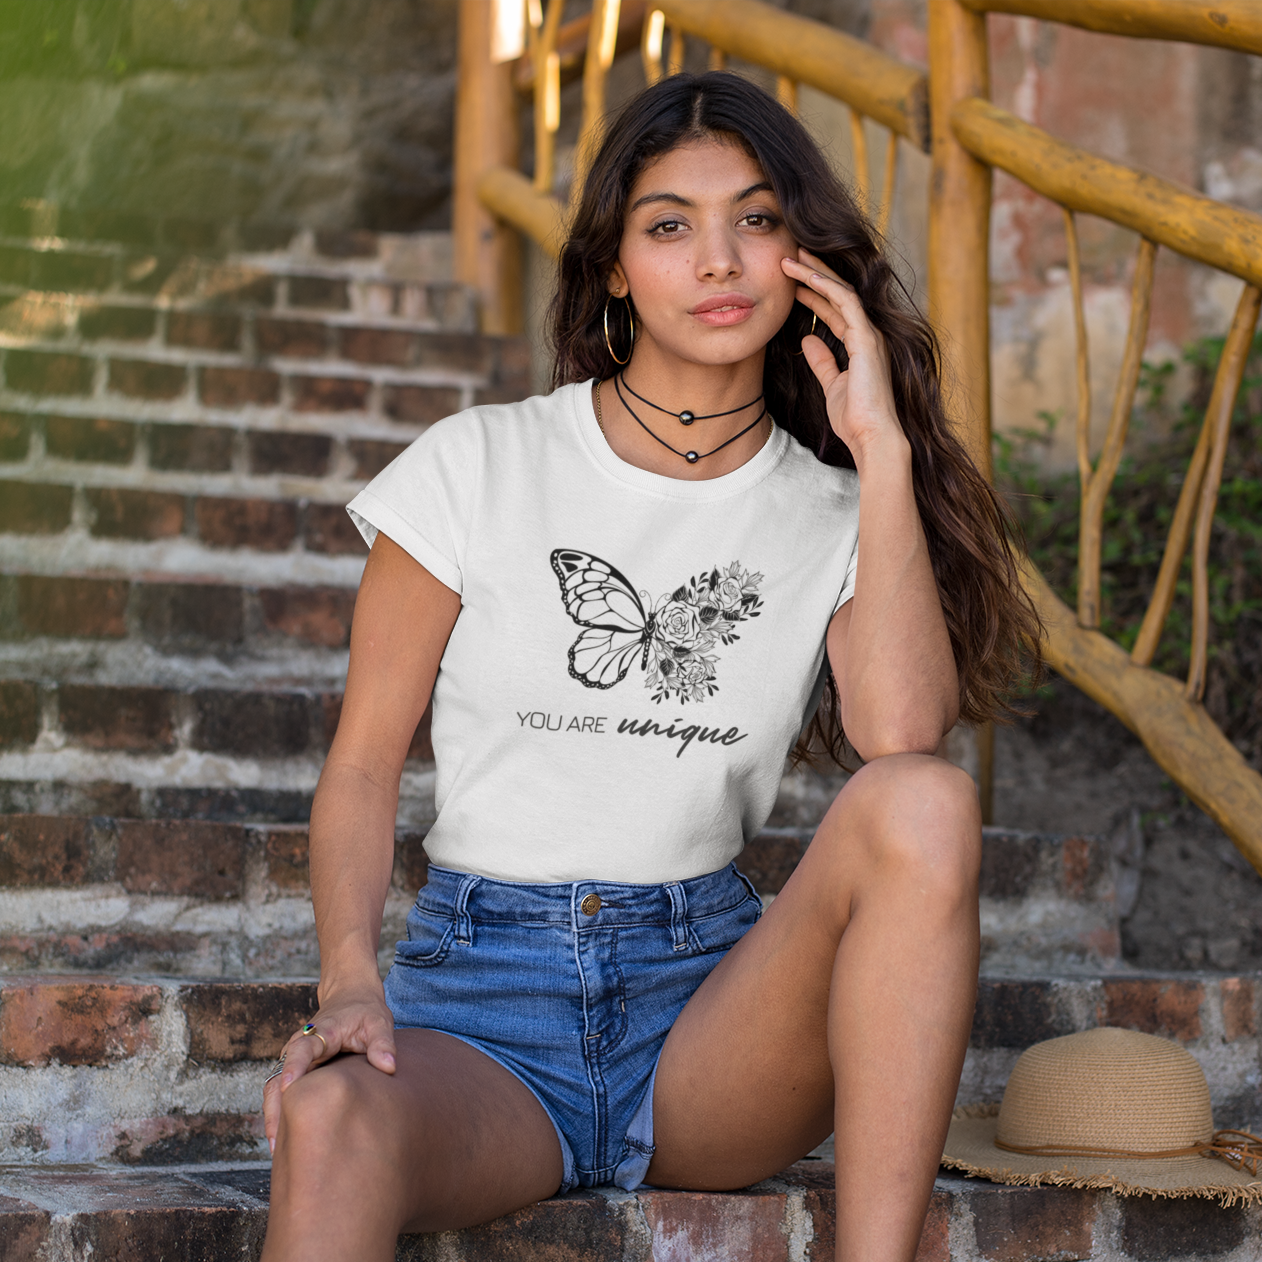 Story of Awakening Lifestyle Community Spirituality Relationships Love Light Meditation Oneness Earth Balance Healing Shop Store Charity Tree Nature Read Write T shirt Tops Tees Clothing Women Horoscope Organic Cotton You Are Unique Butterfly Quote